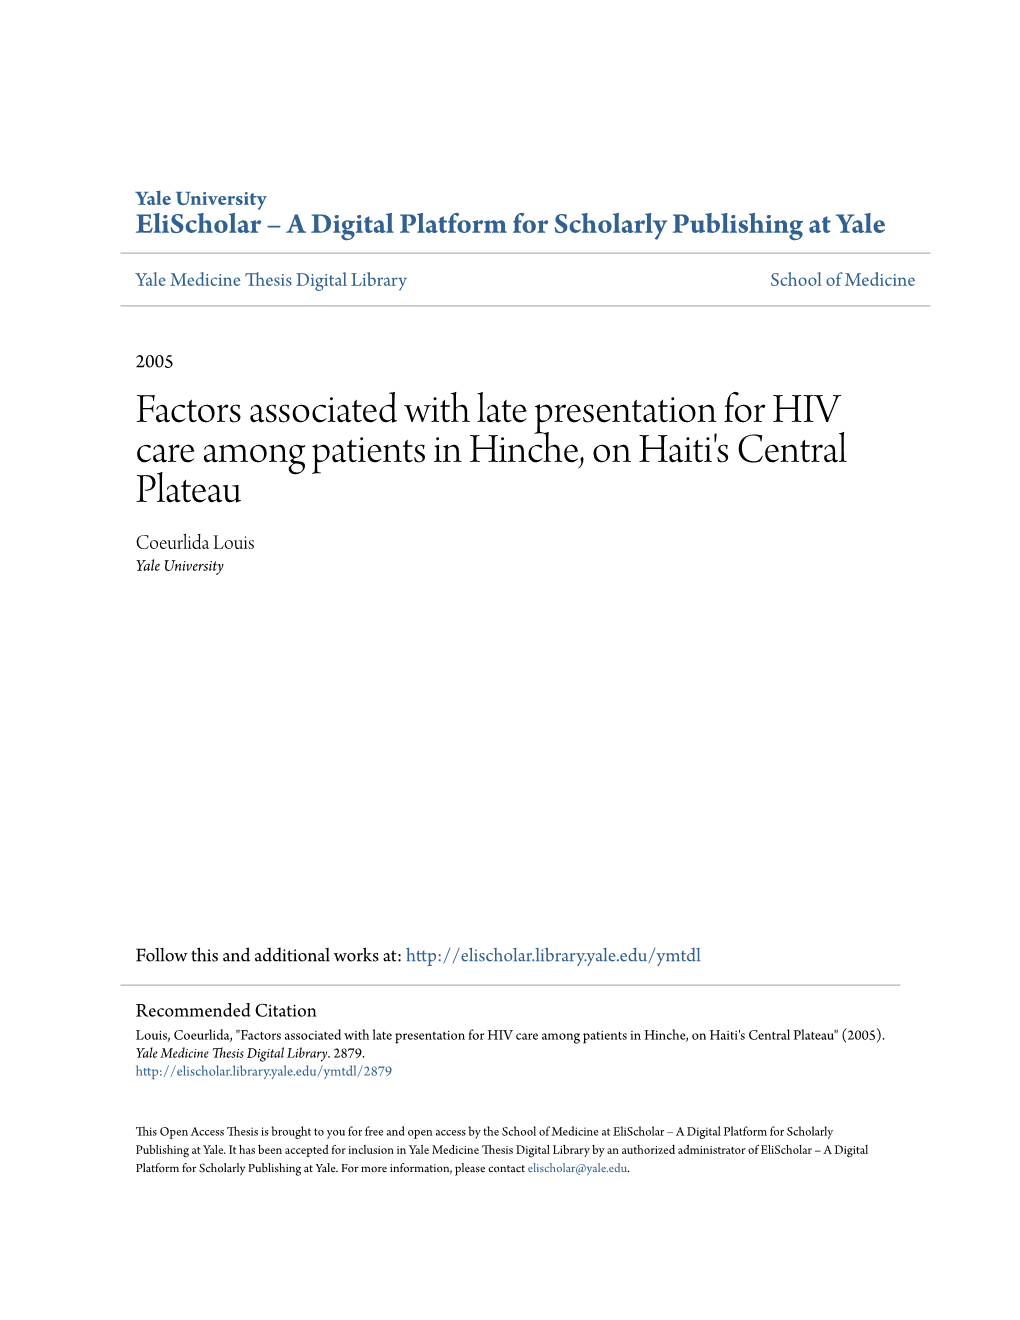 Factors Associated with Late Presentation for HIV Care Among Patients in Hinche, on Haiti's Central Plateau Coeurlida Louis Yale University